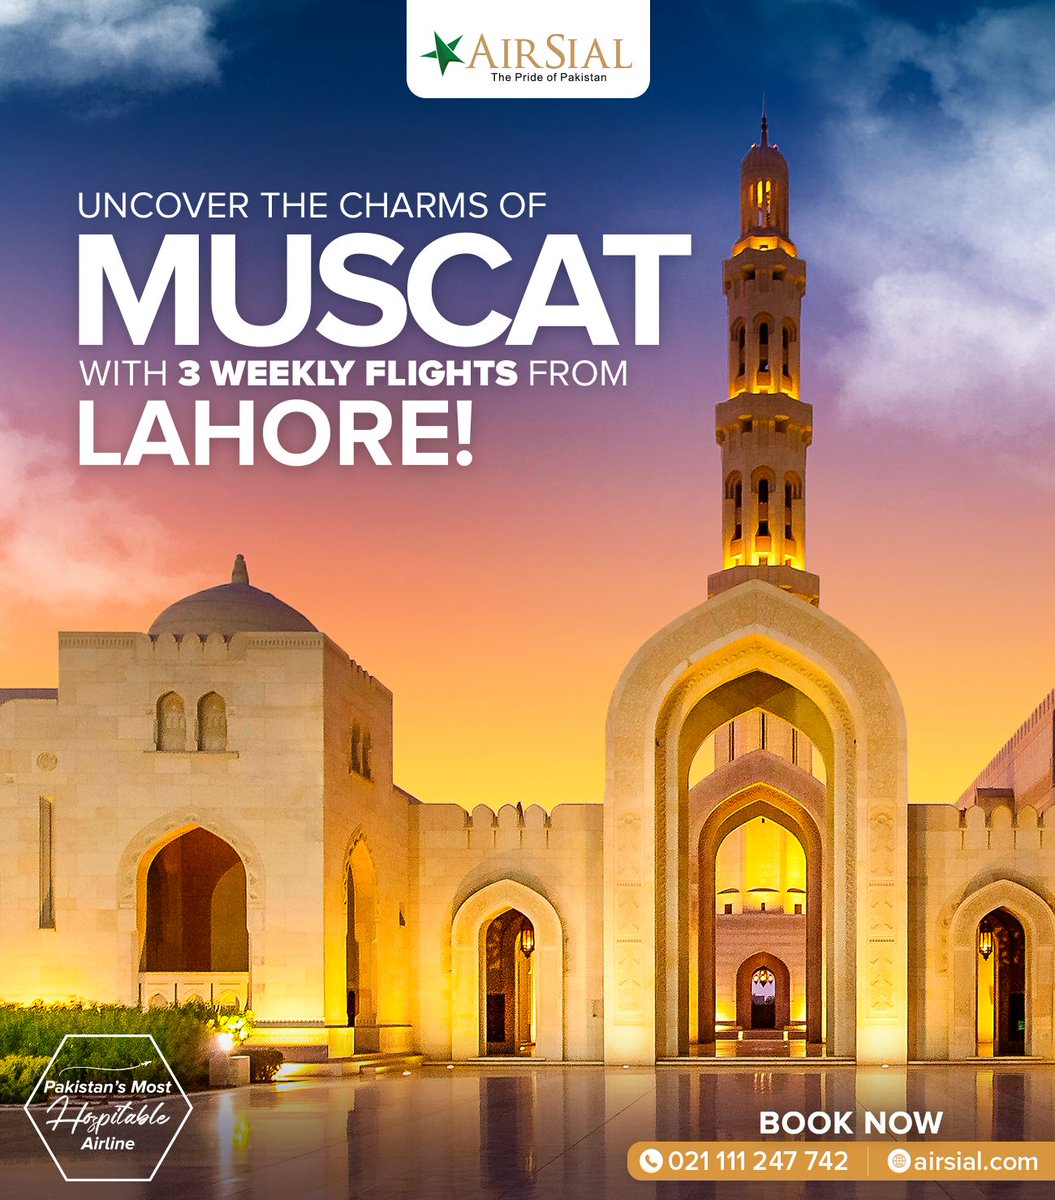 Uncover the charms of #Muscat with 3 Weekly flights between #Lahore-Muscat-Lahore from 8th June onwards ✈️🇴🇲

Book your tickets now!

#AirSial - The Pride of #Pakistan #PakistansMostHospitableAirline